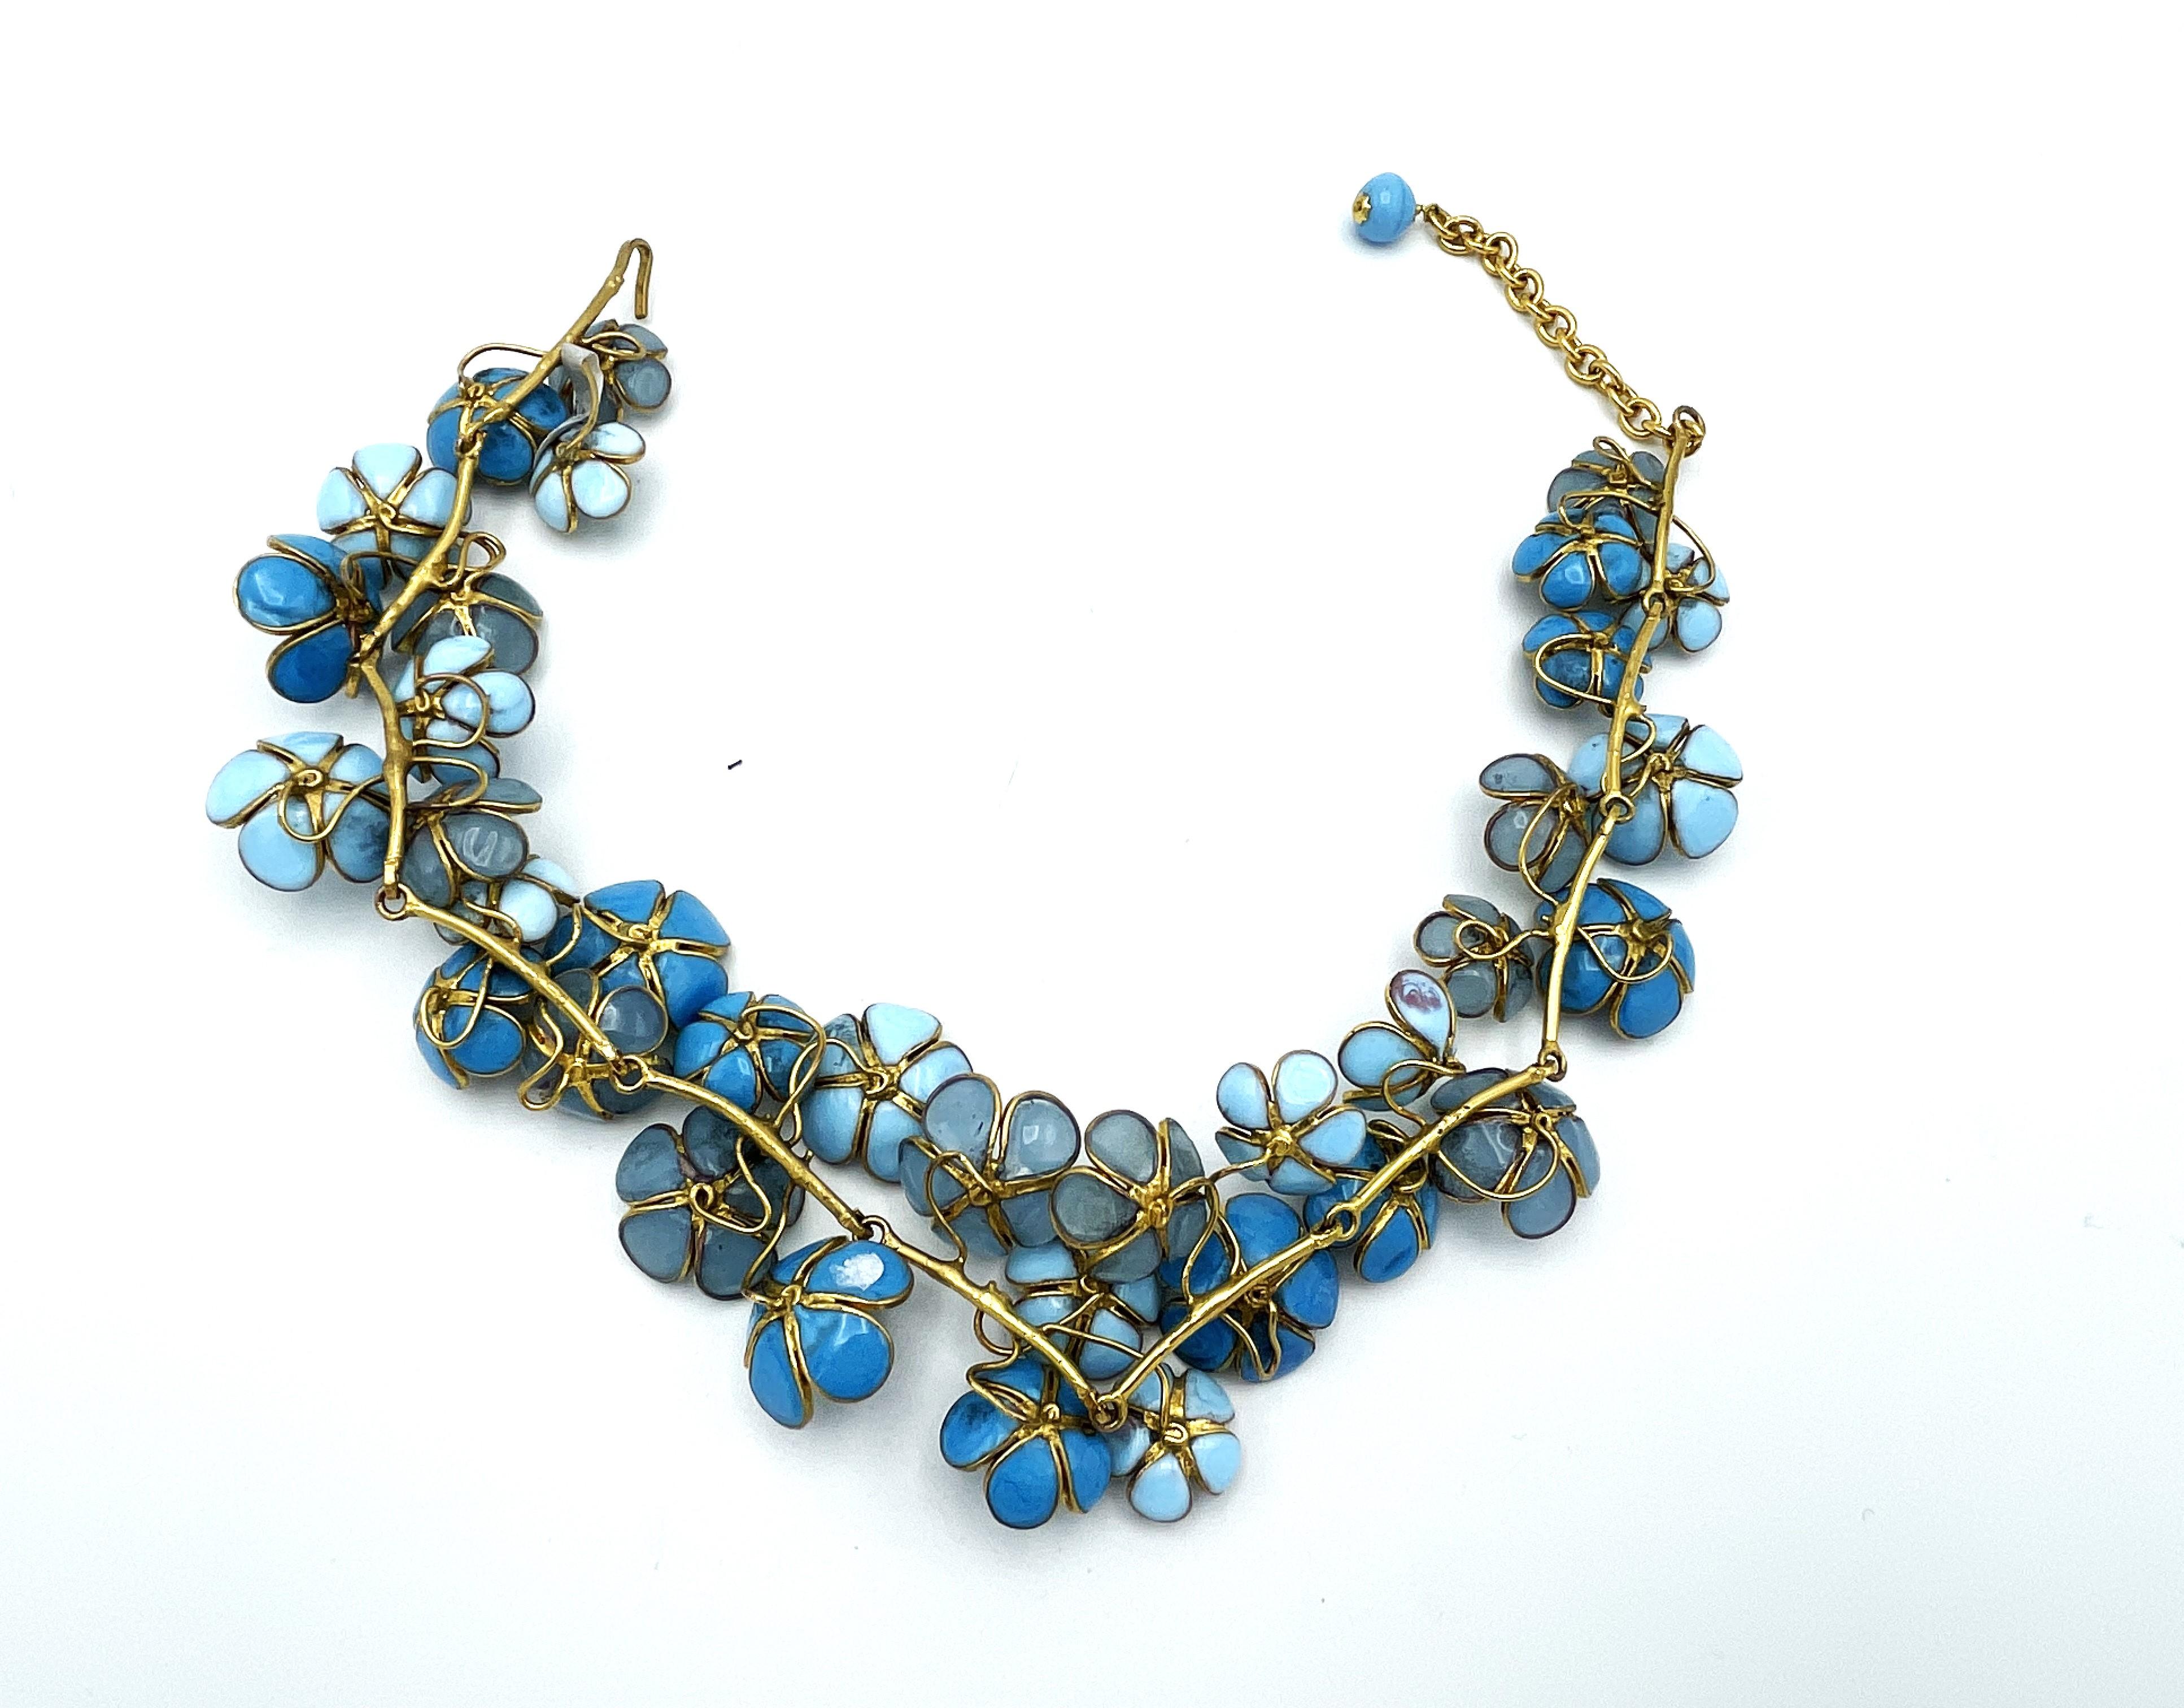 Necklace of many blue glass flowers from Gripoix in the style of Chanel For Sale 2